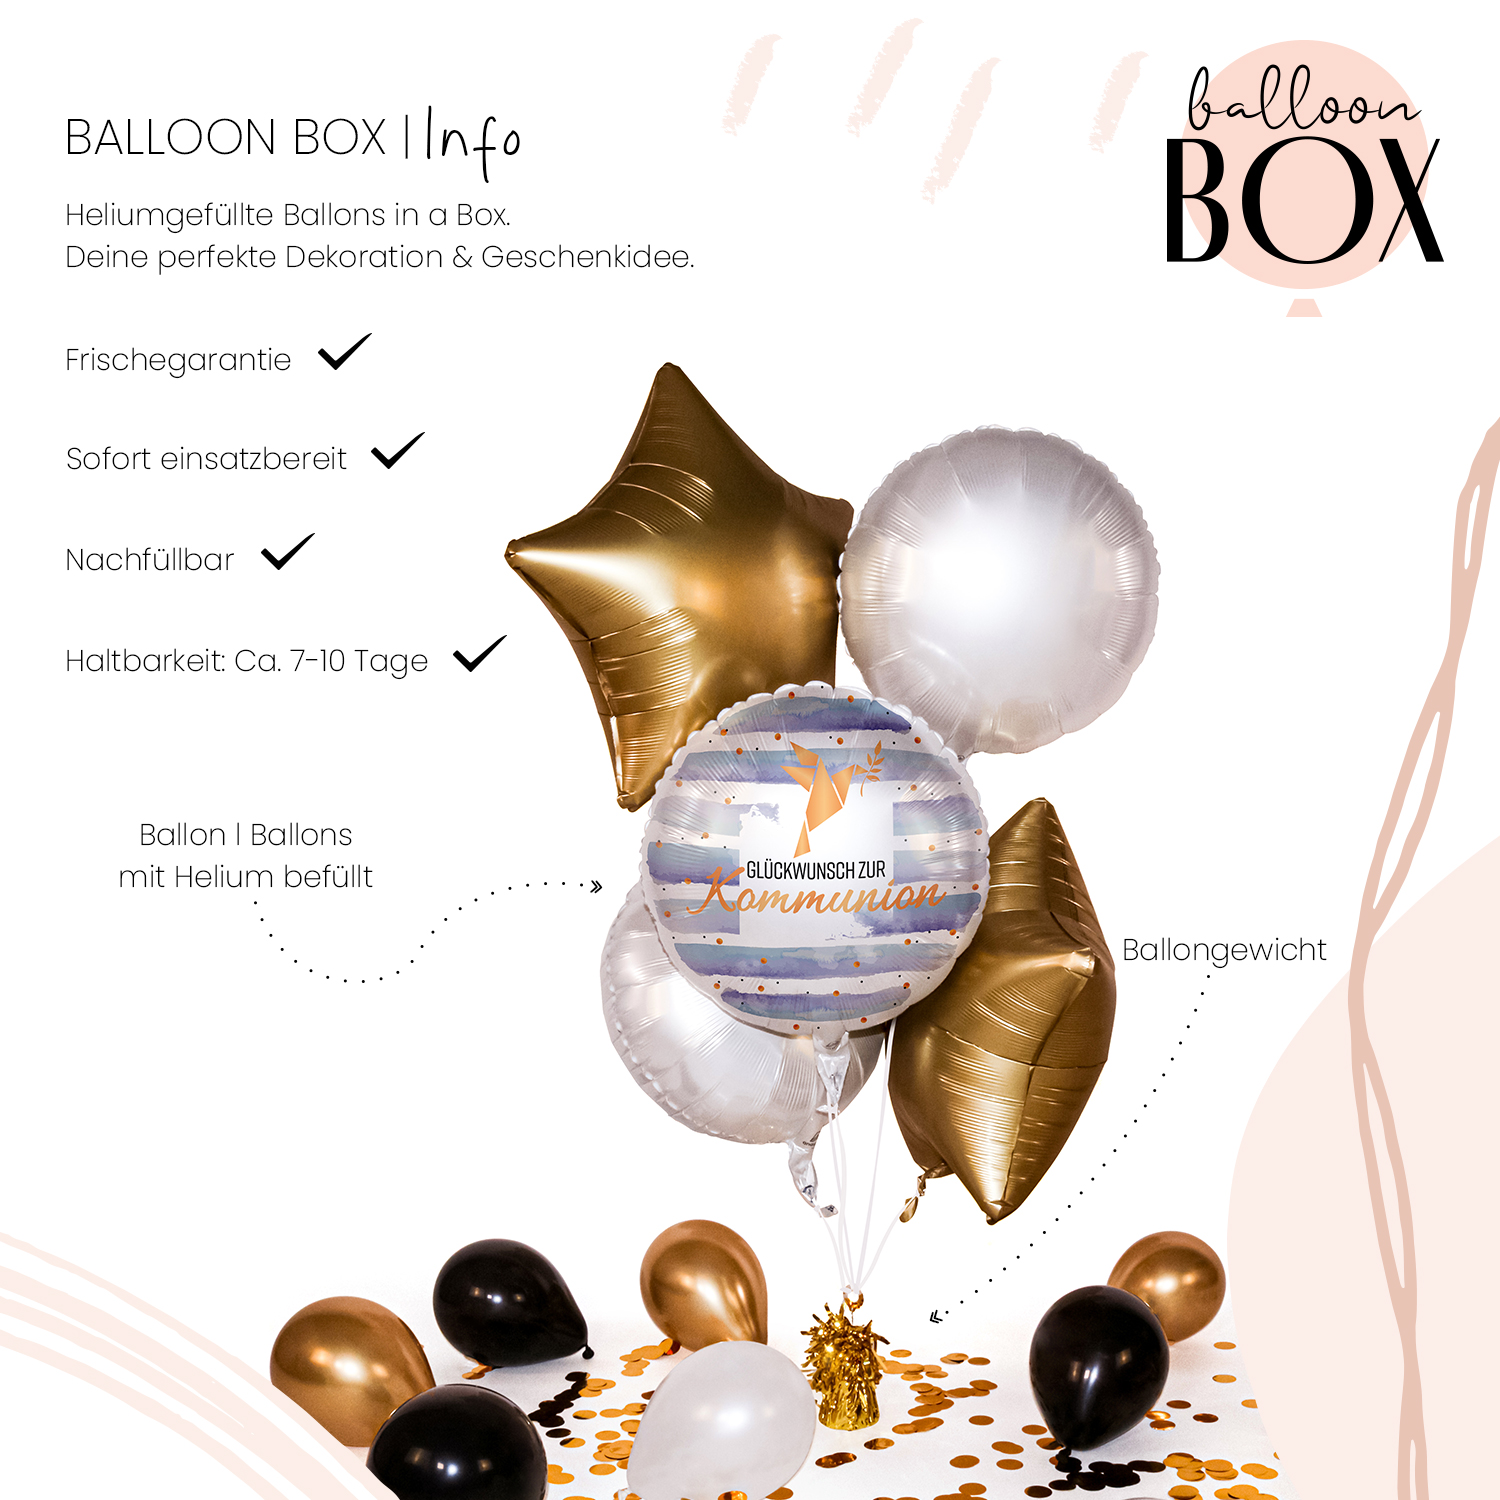 Heliumballon in a Box - Holy Communion